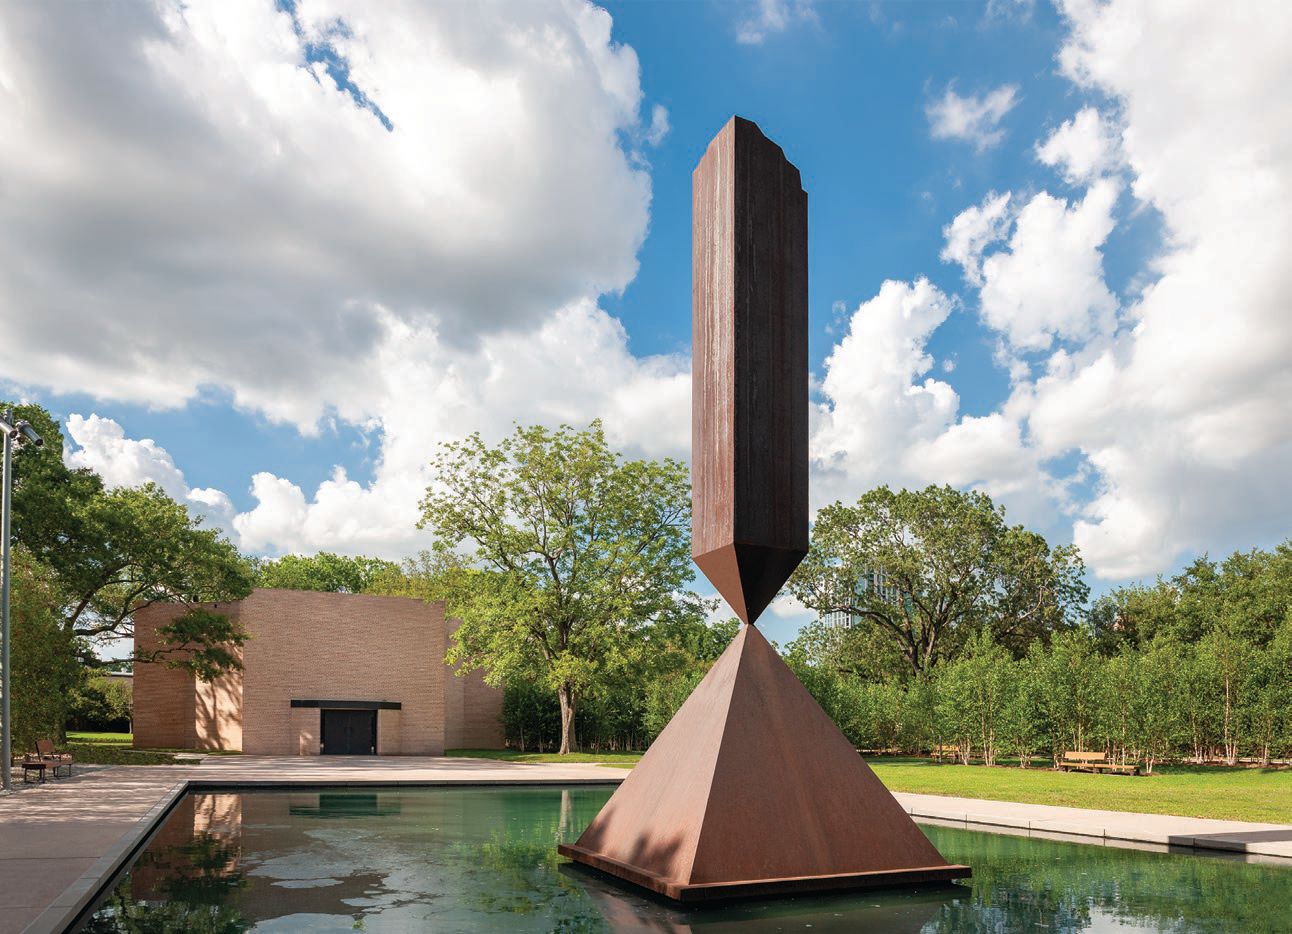 The Rothko Chapel stuns inside and out. PHOTO COURTESY OF BRANDS